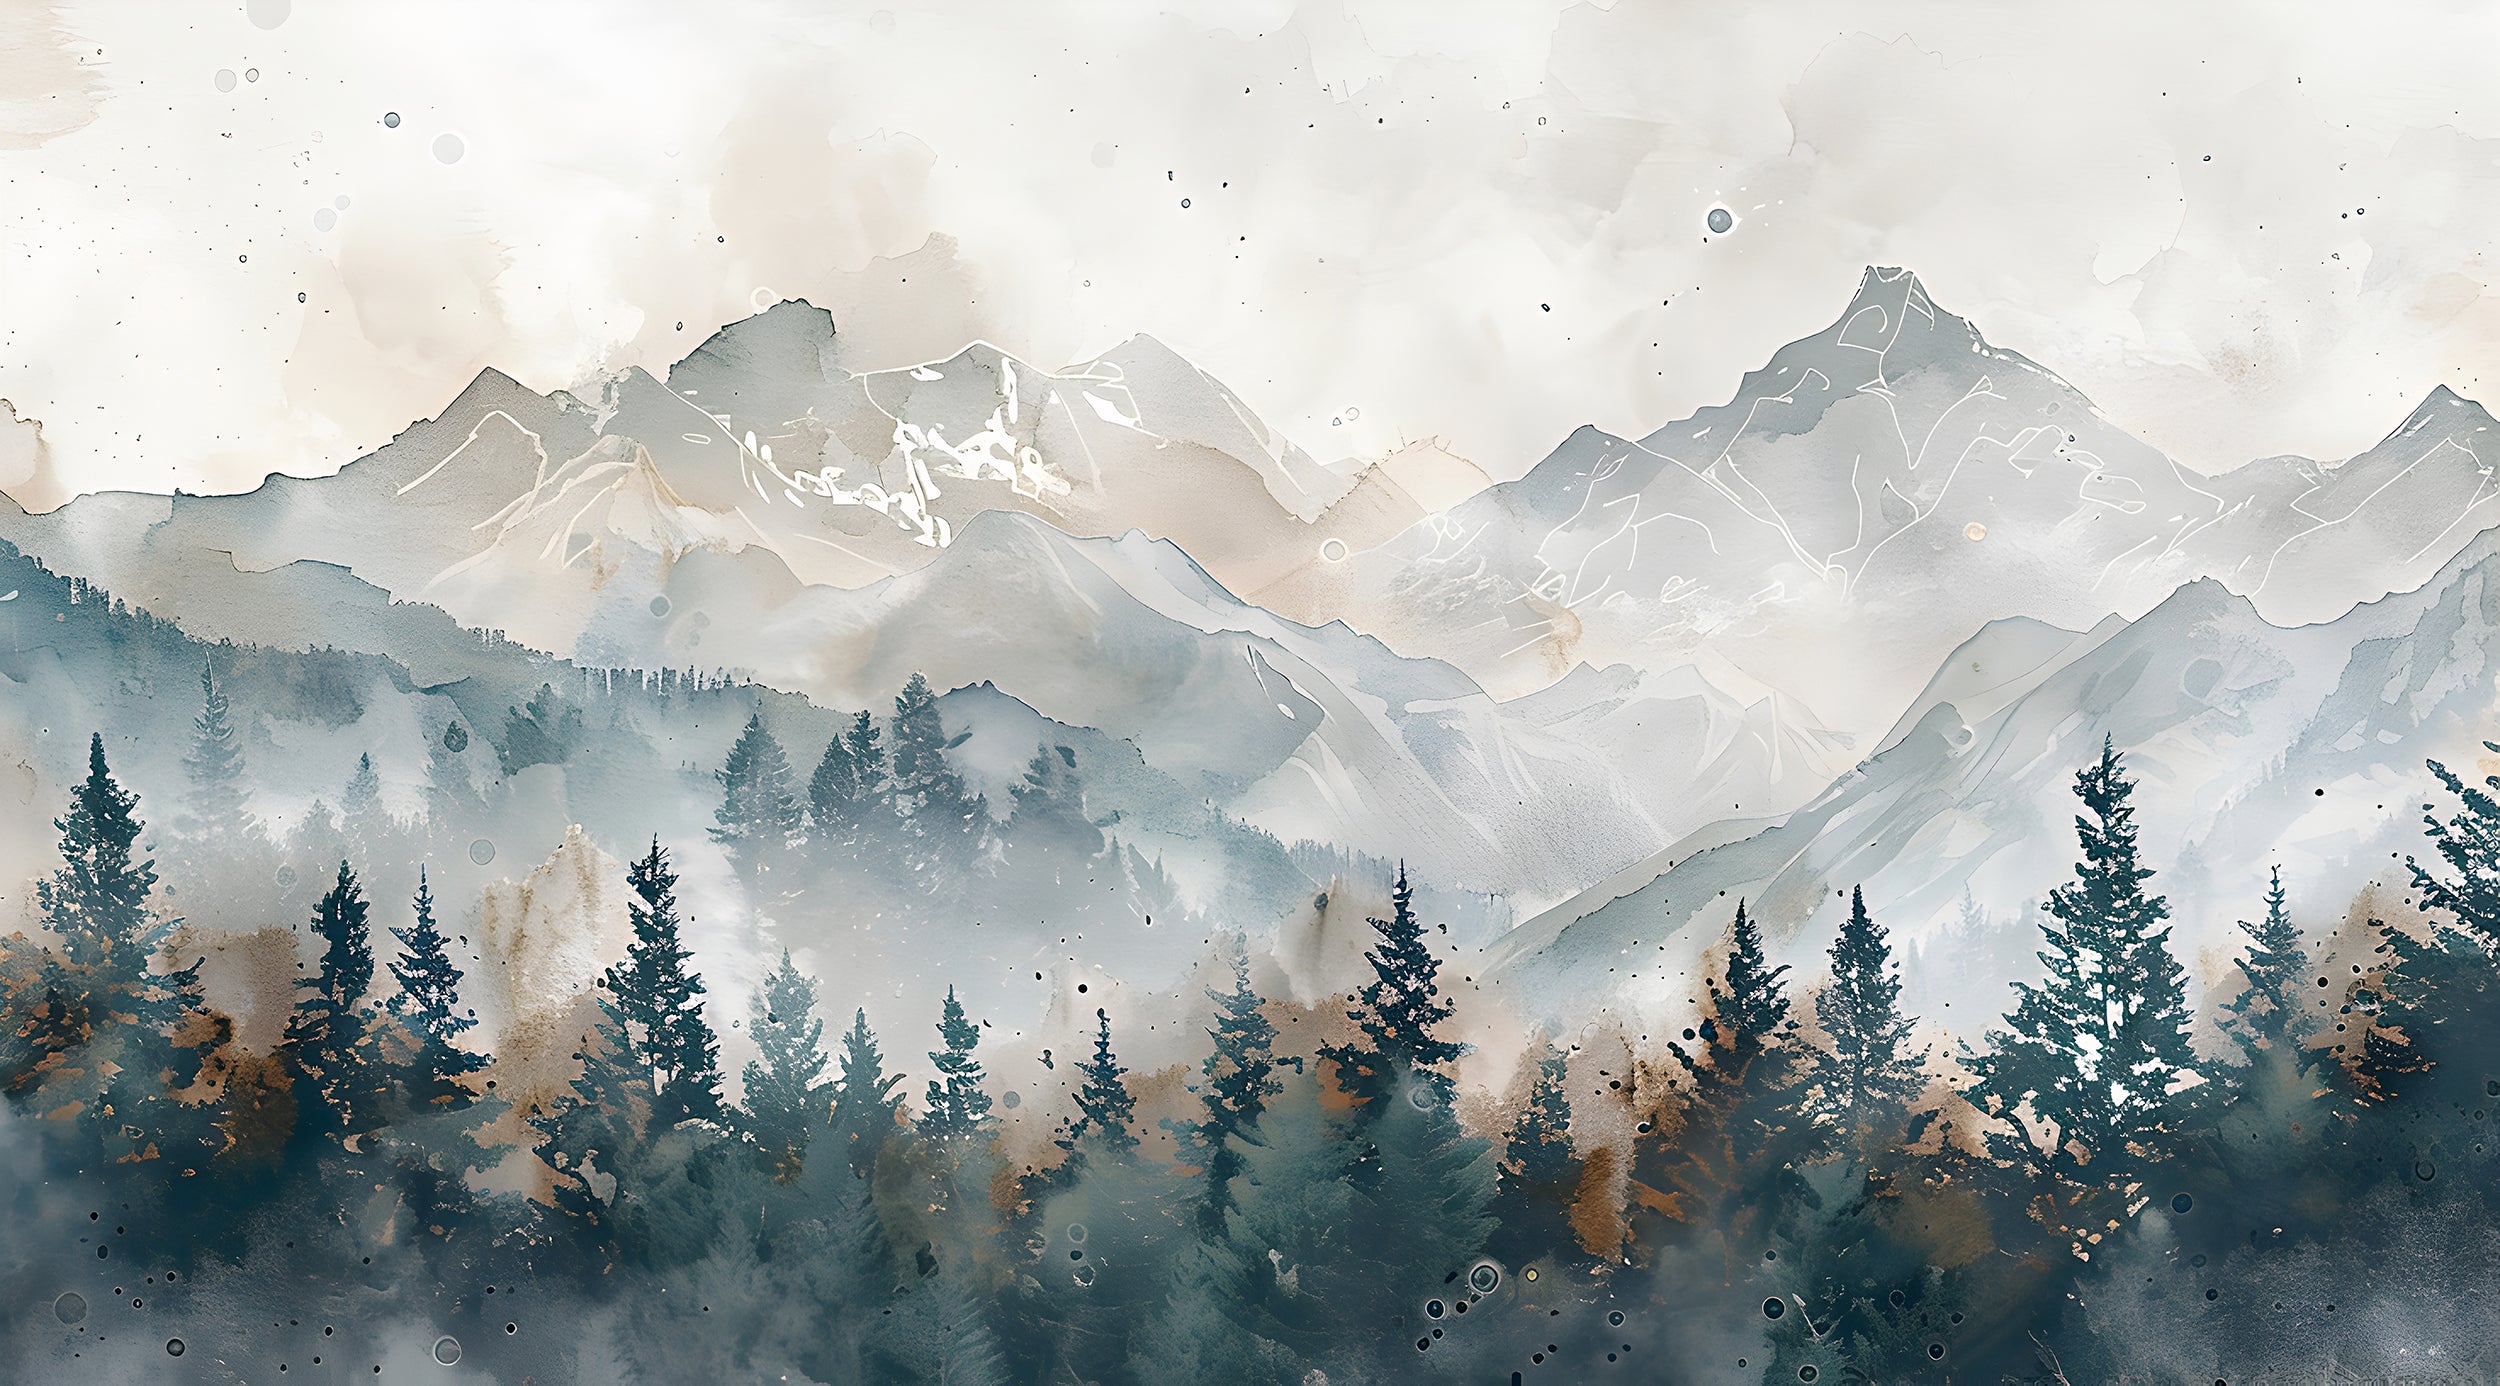 Forest and Mountains in Watercolor Style Mural, Grey Cloudy Mountain Landscape, Peel and Stick Pine Forest Natural Colors Wall Decor, Removable Wall Art